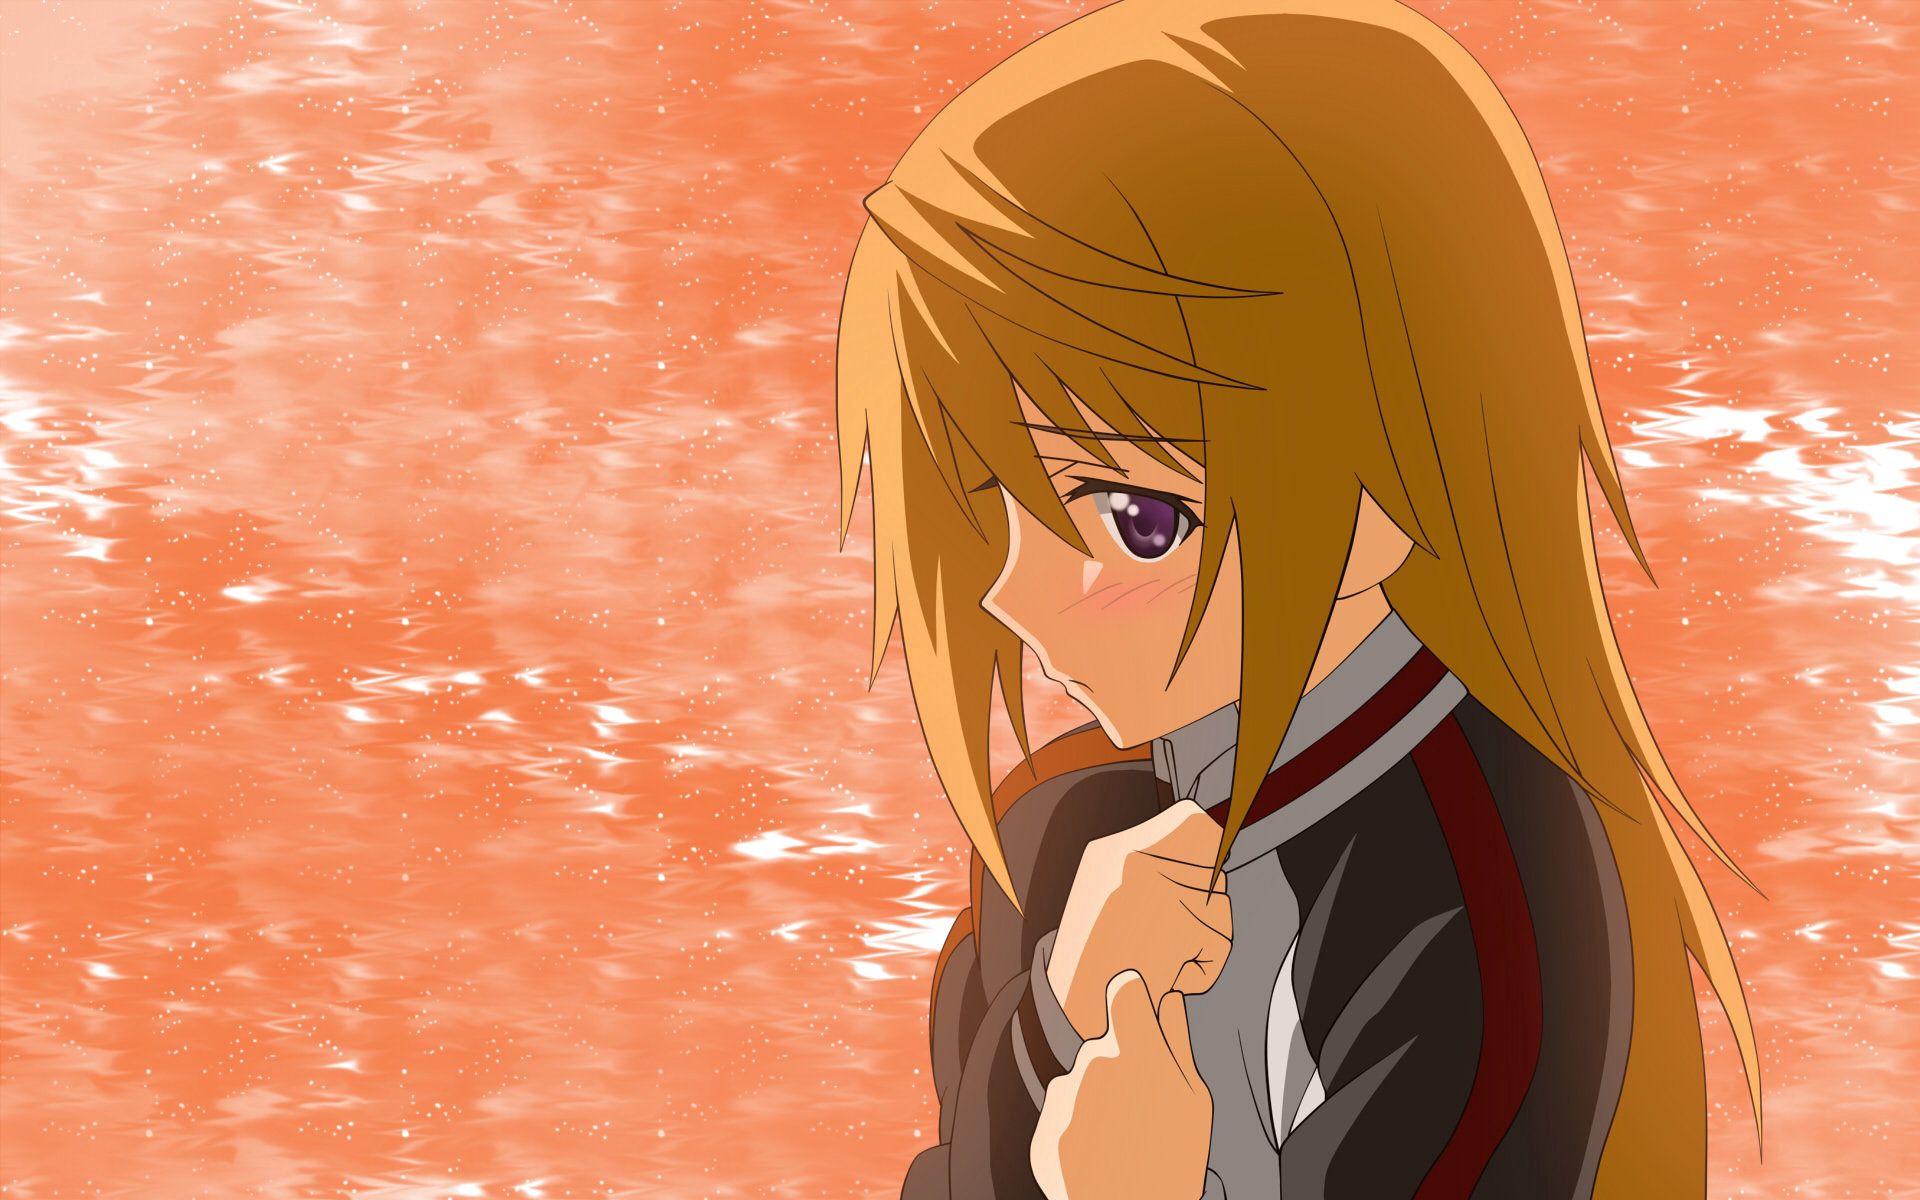 130096 free wallpaper 240x320 for phone, download images sadness, blonde, girl, anime 240x320 for mobile